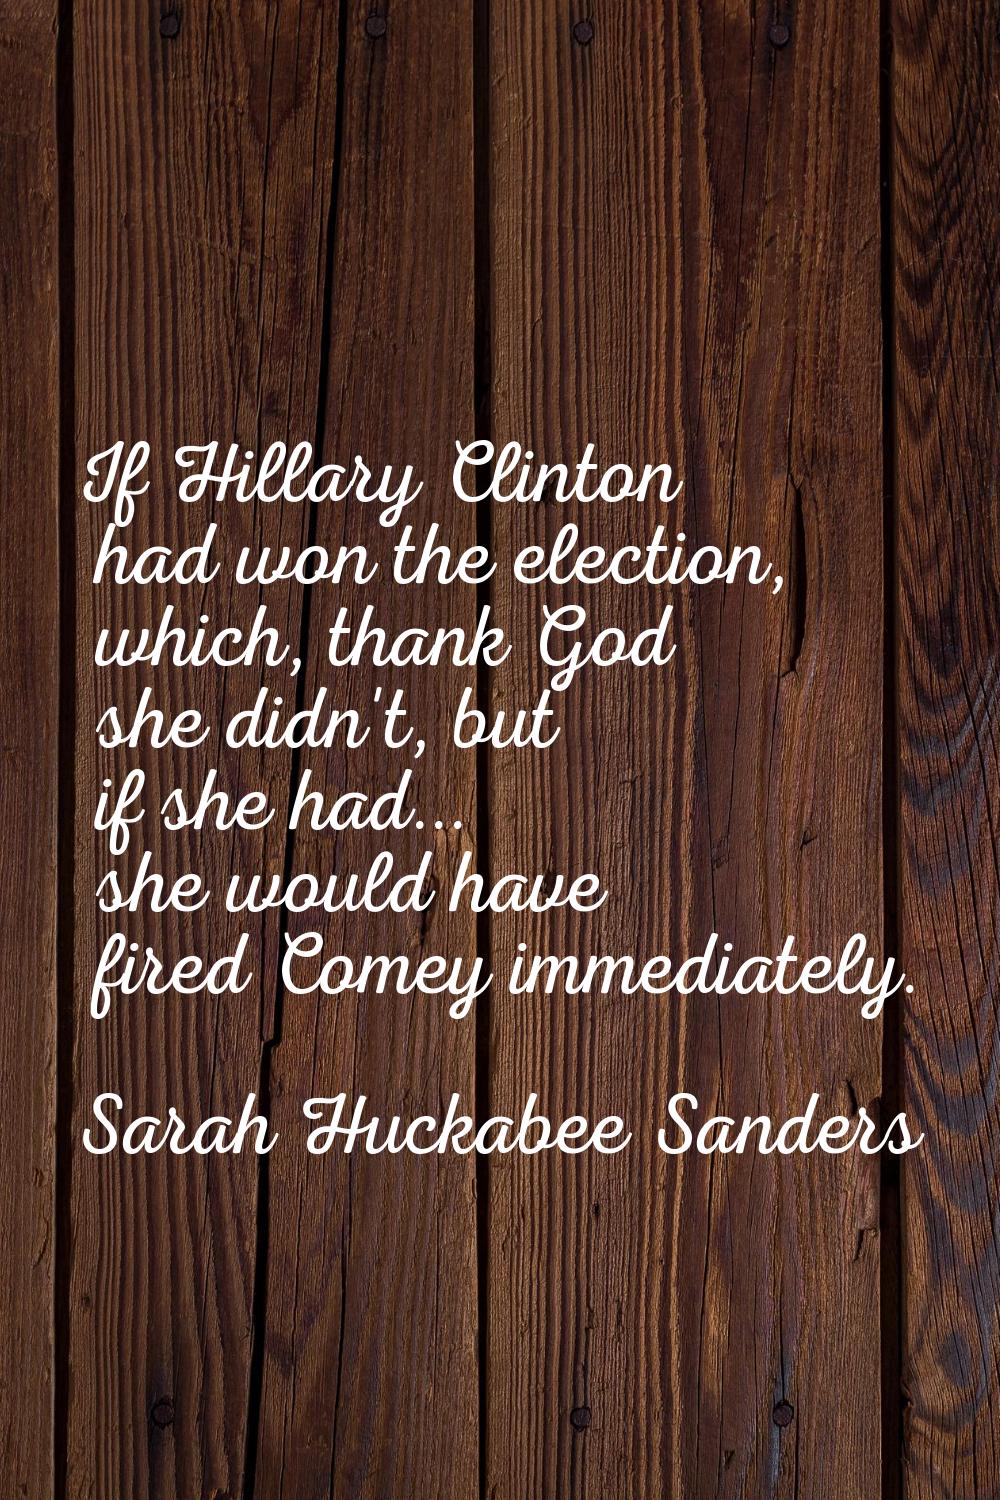 If Hillary Clinton had won the election, which, thank God she didn't, but if she had... she would h